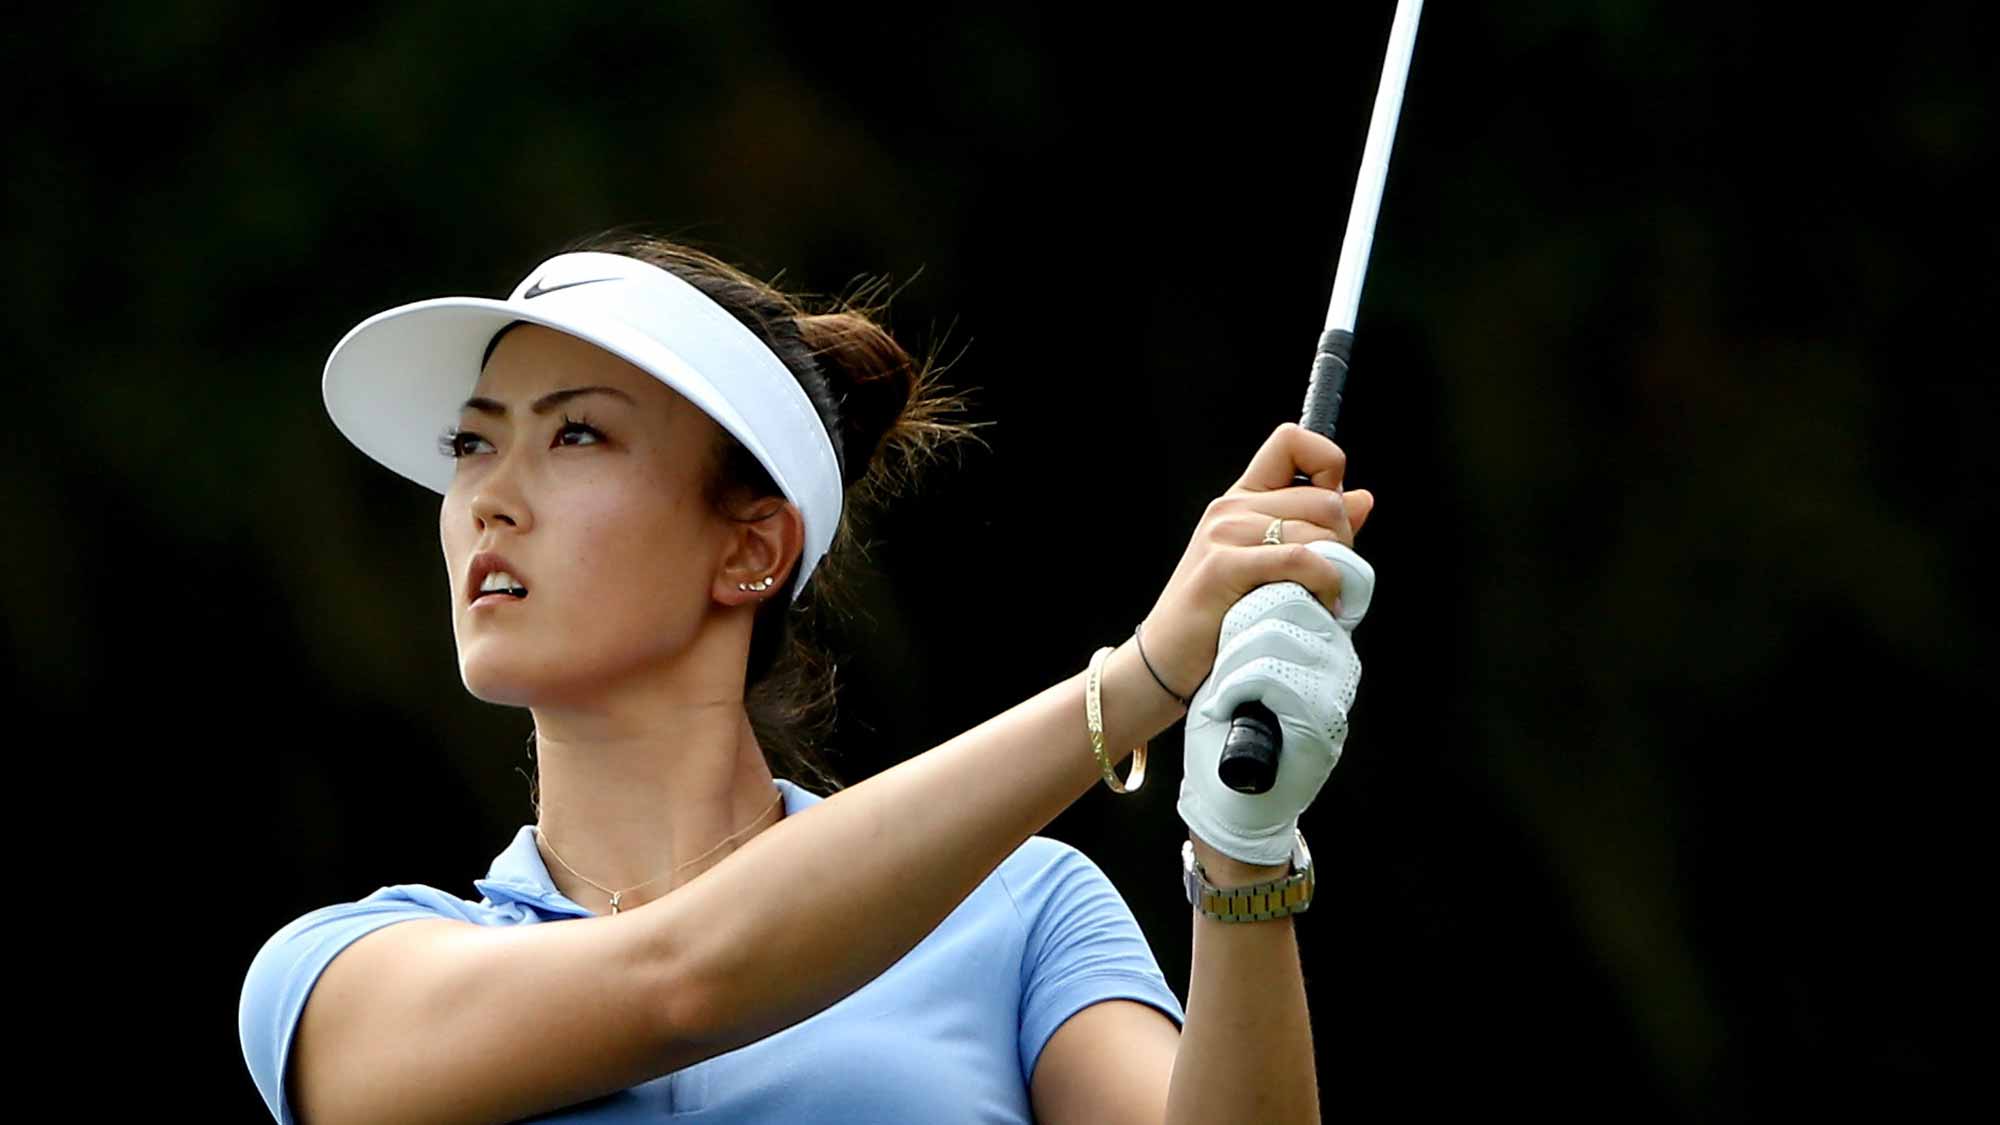 Michelle Wie of the United States plays a shot on the fourth hole during the first round of the Coates Golf Championship Presented By R+L Carriers at Golden Ocala Golf Club